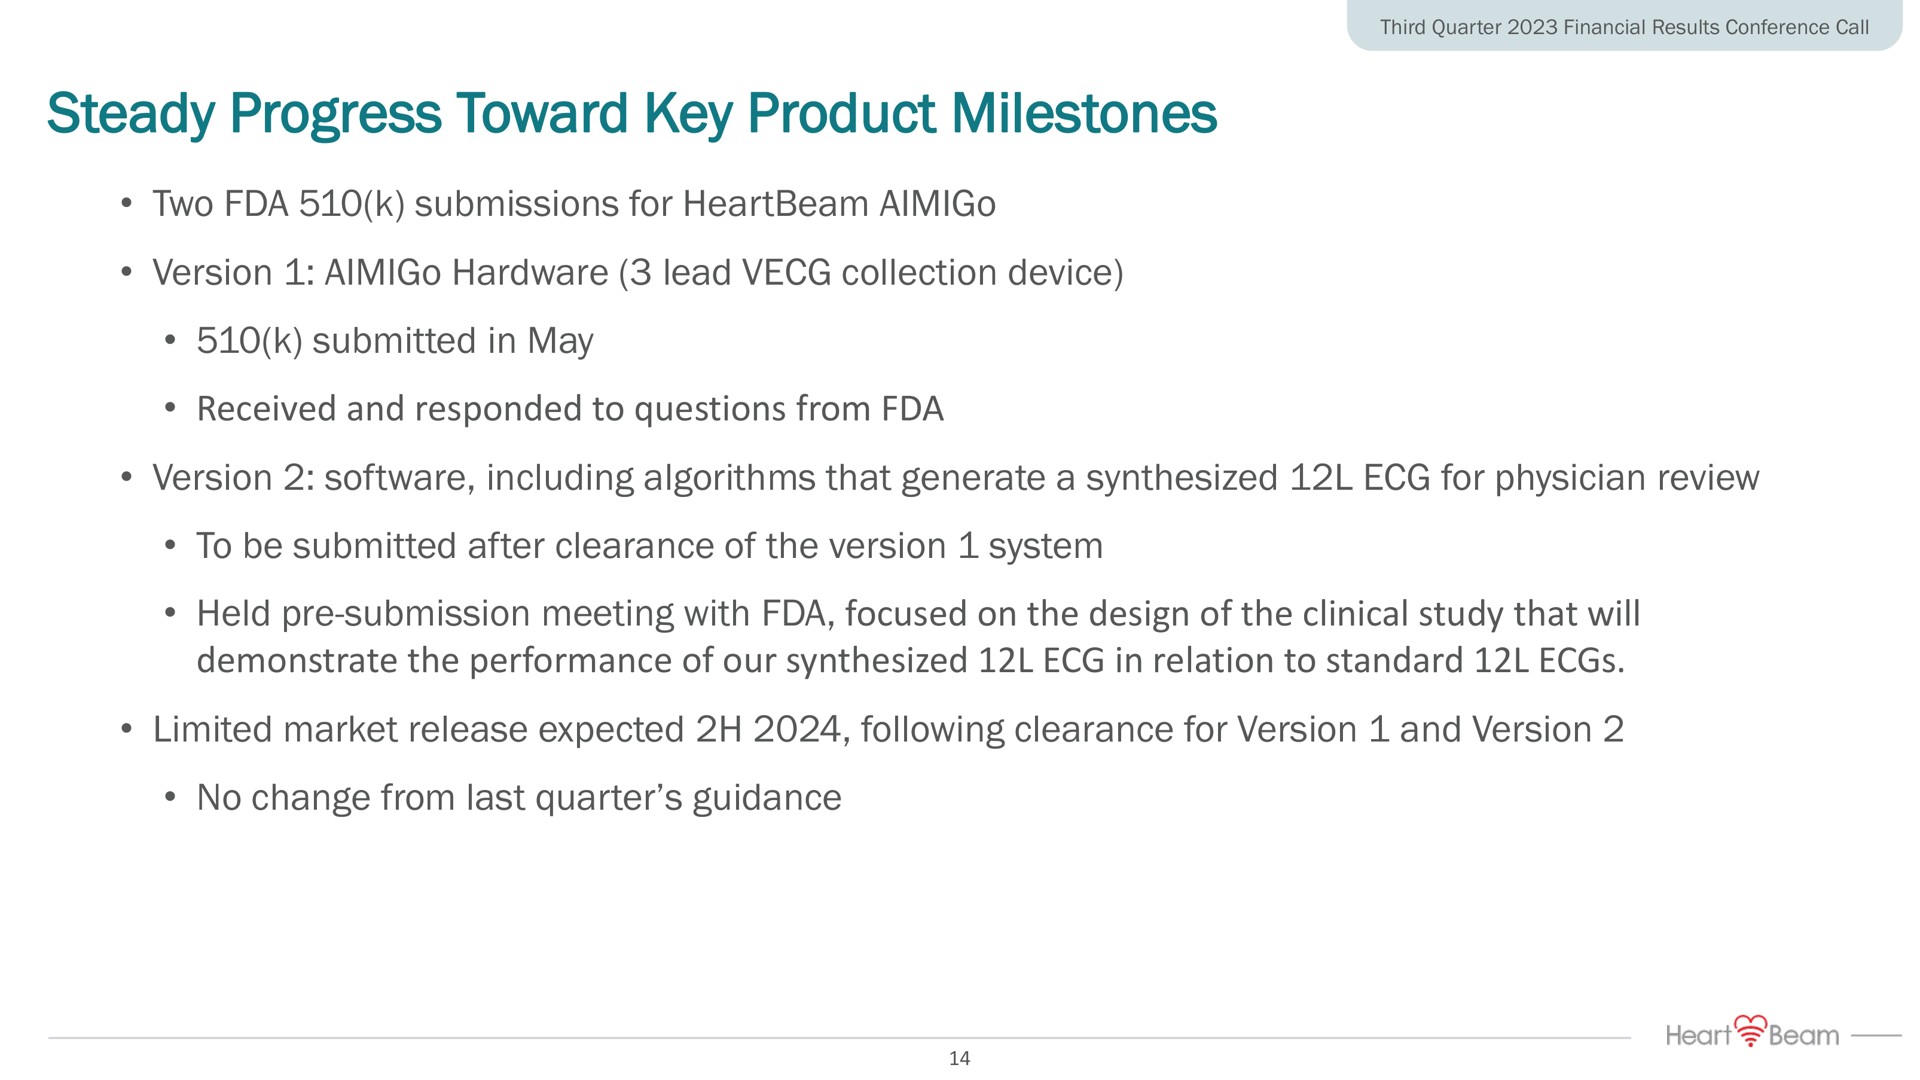 steady progress toward key product milestones two submissions for version hardware lead collection device submitted in may received and responded to questions from version including algorithms that generate a synthesized for physician review to be submitted after clearance of the version system held submission meeting with focused on the design of the clinical study that will demonstrate the performance of our synthesized in relation to standard limited market release expected following clearance for version and version no change from last quarter guidance | HeartBeam